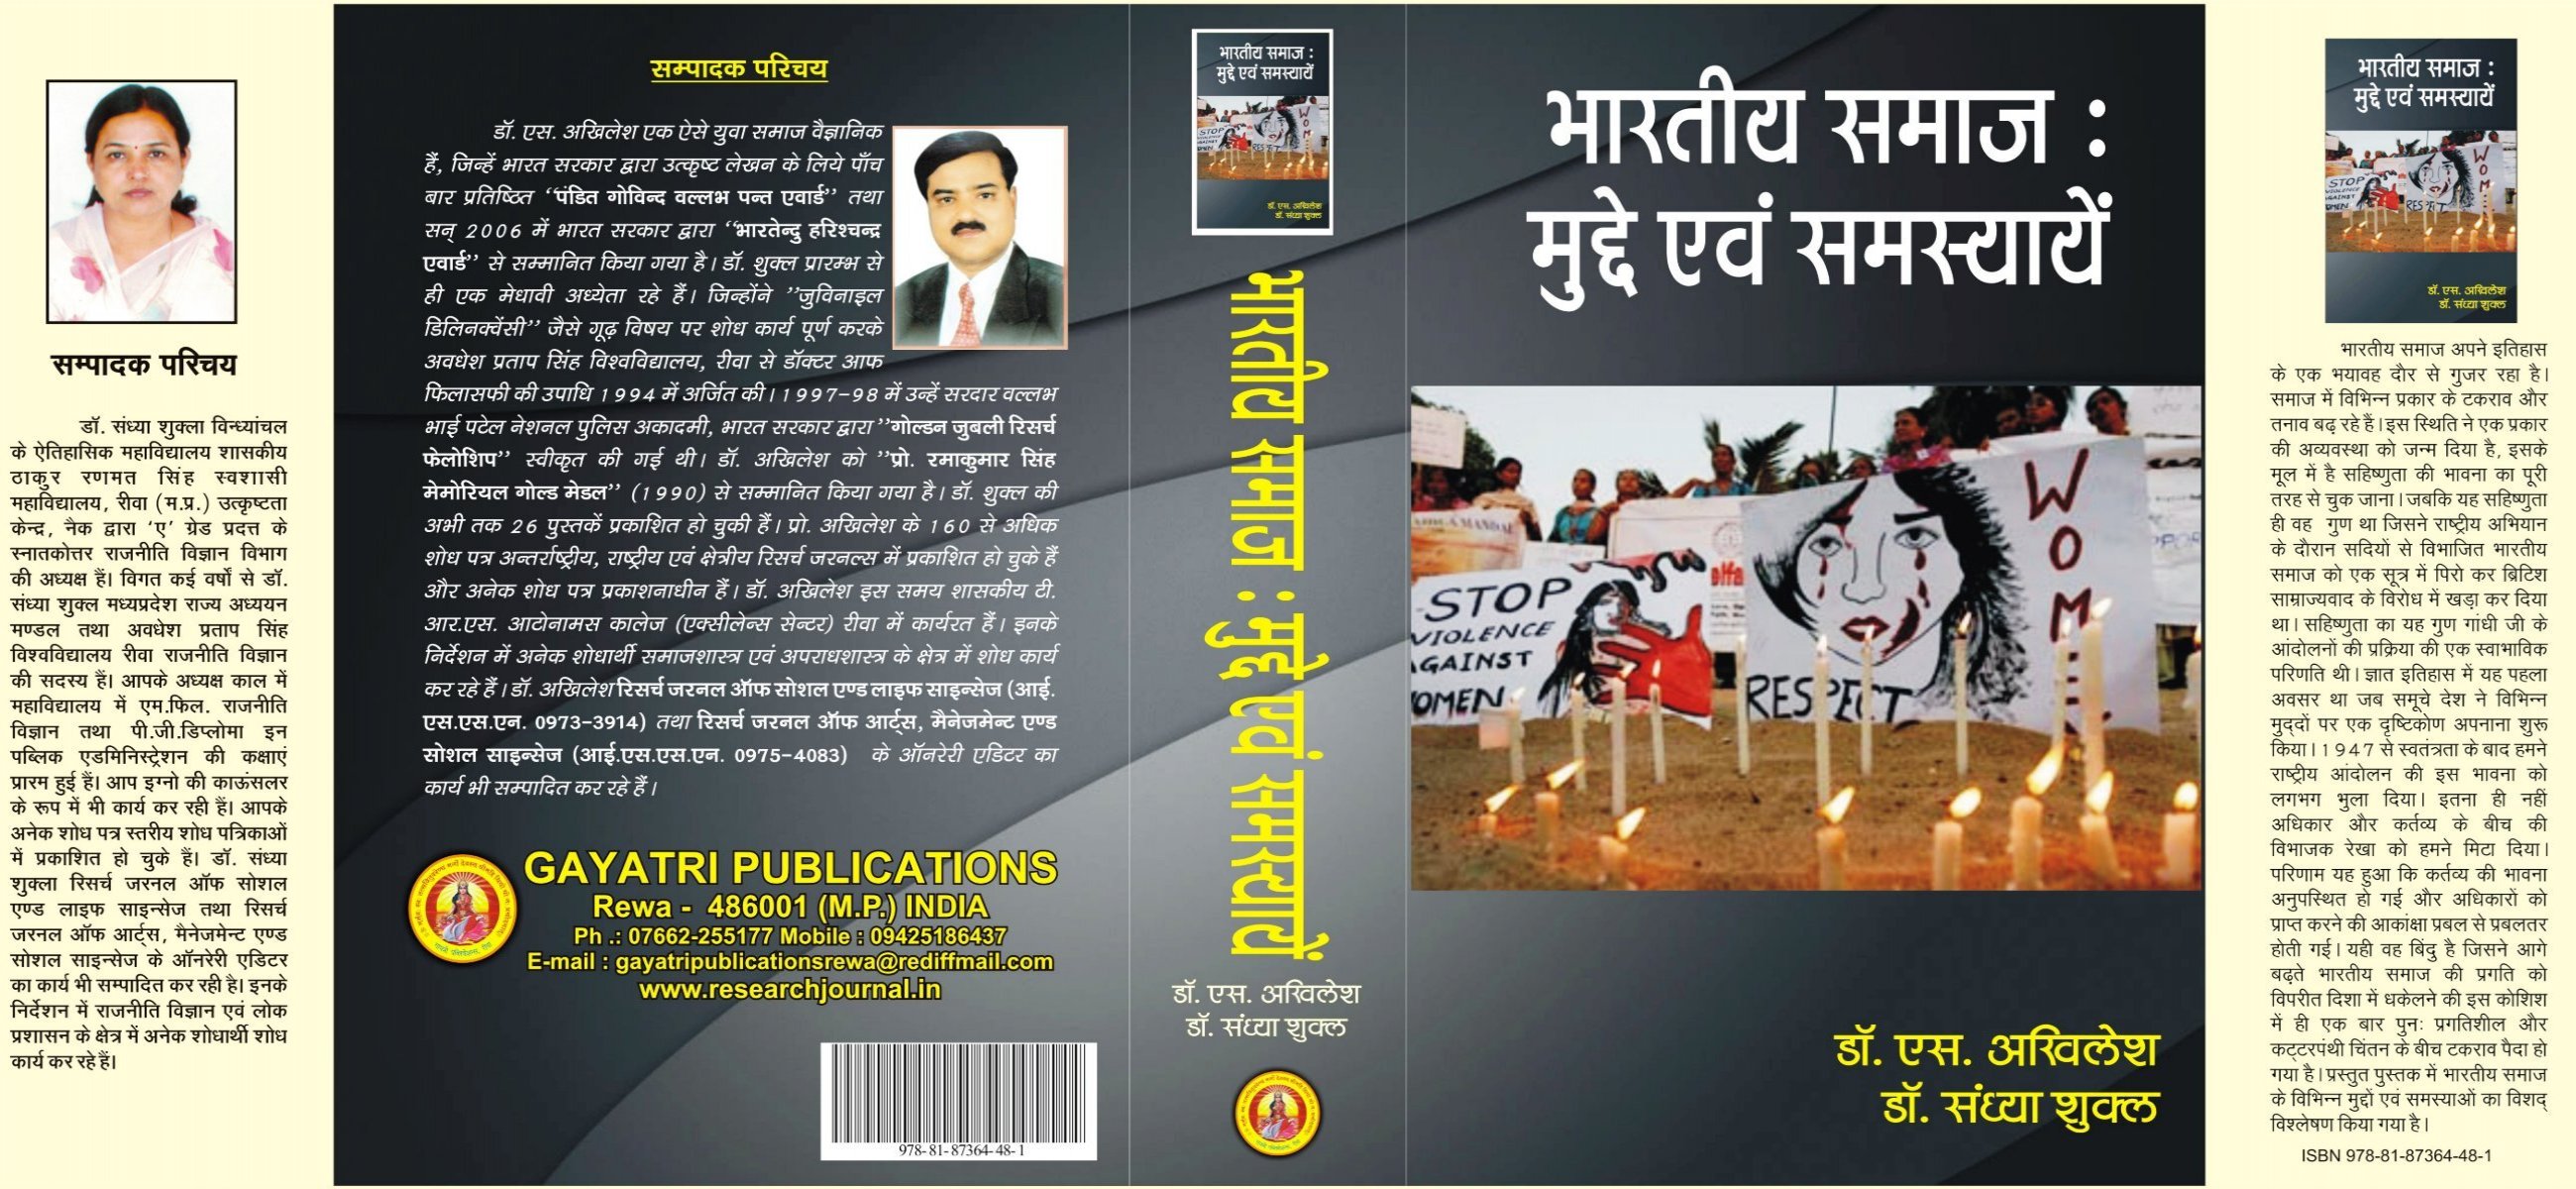 Hindi Edition Research Journal